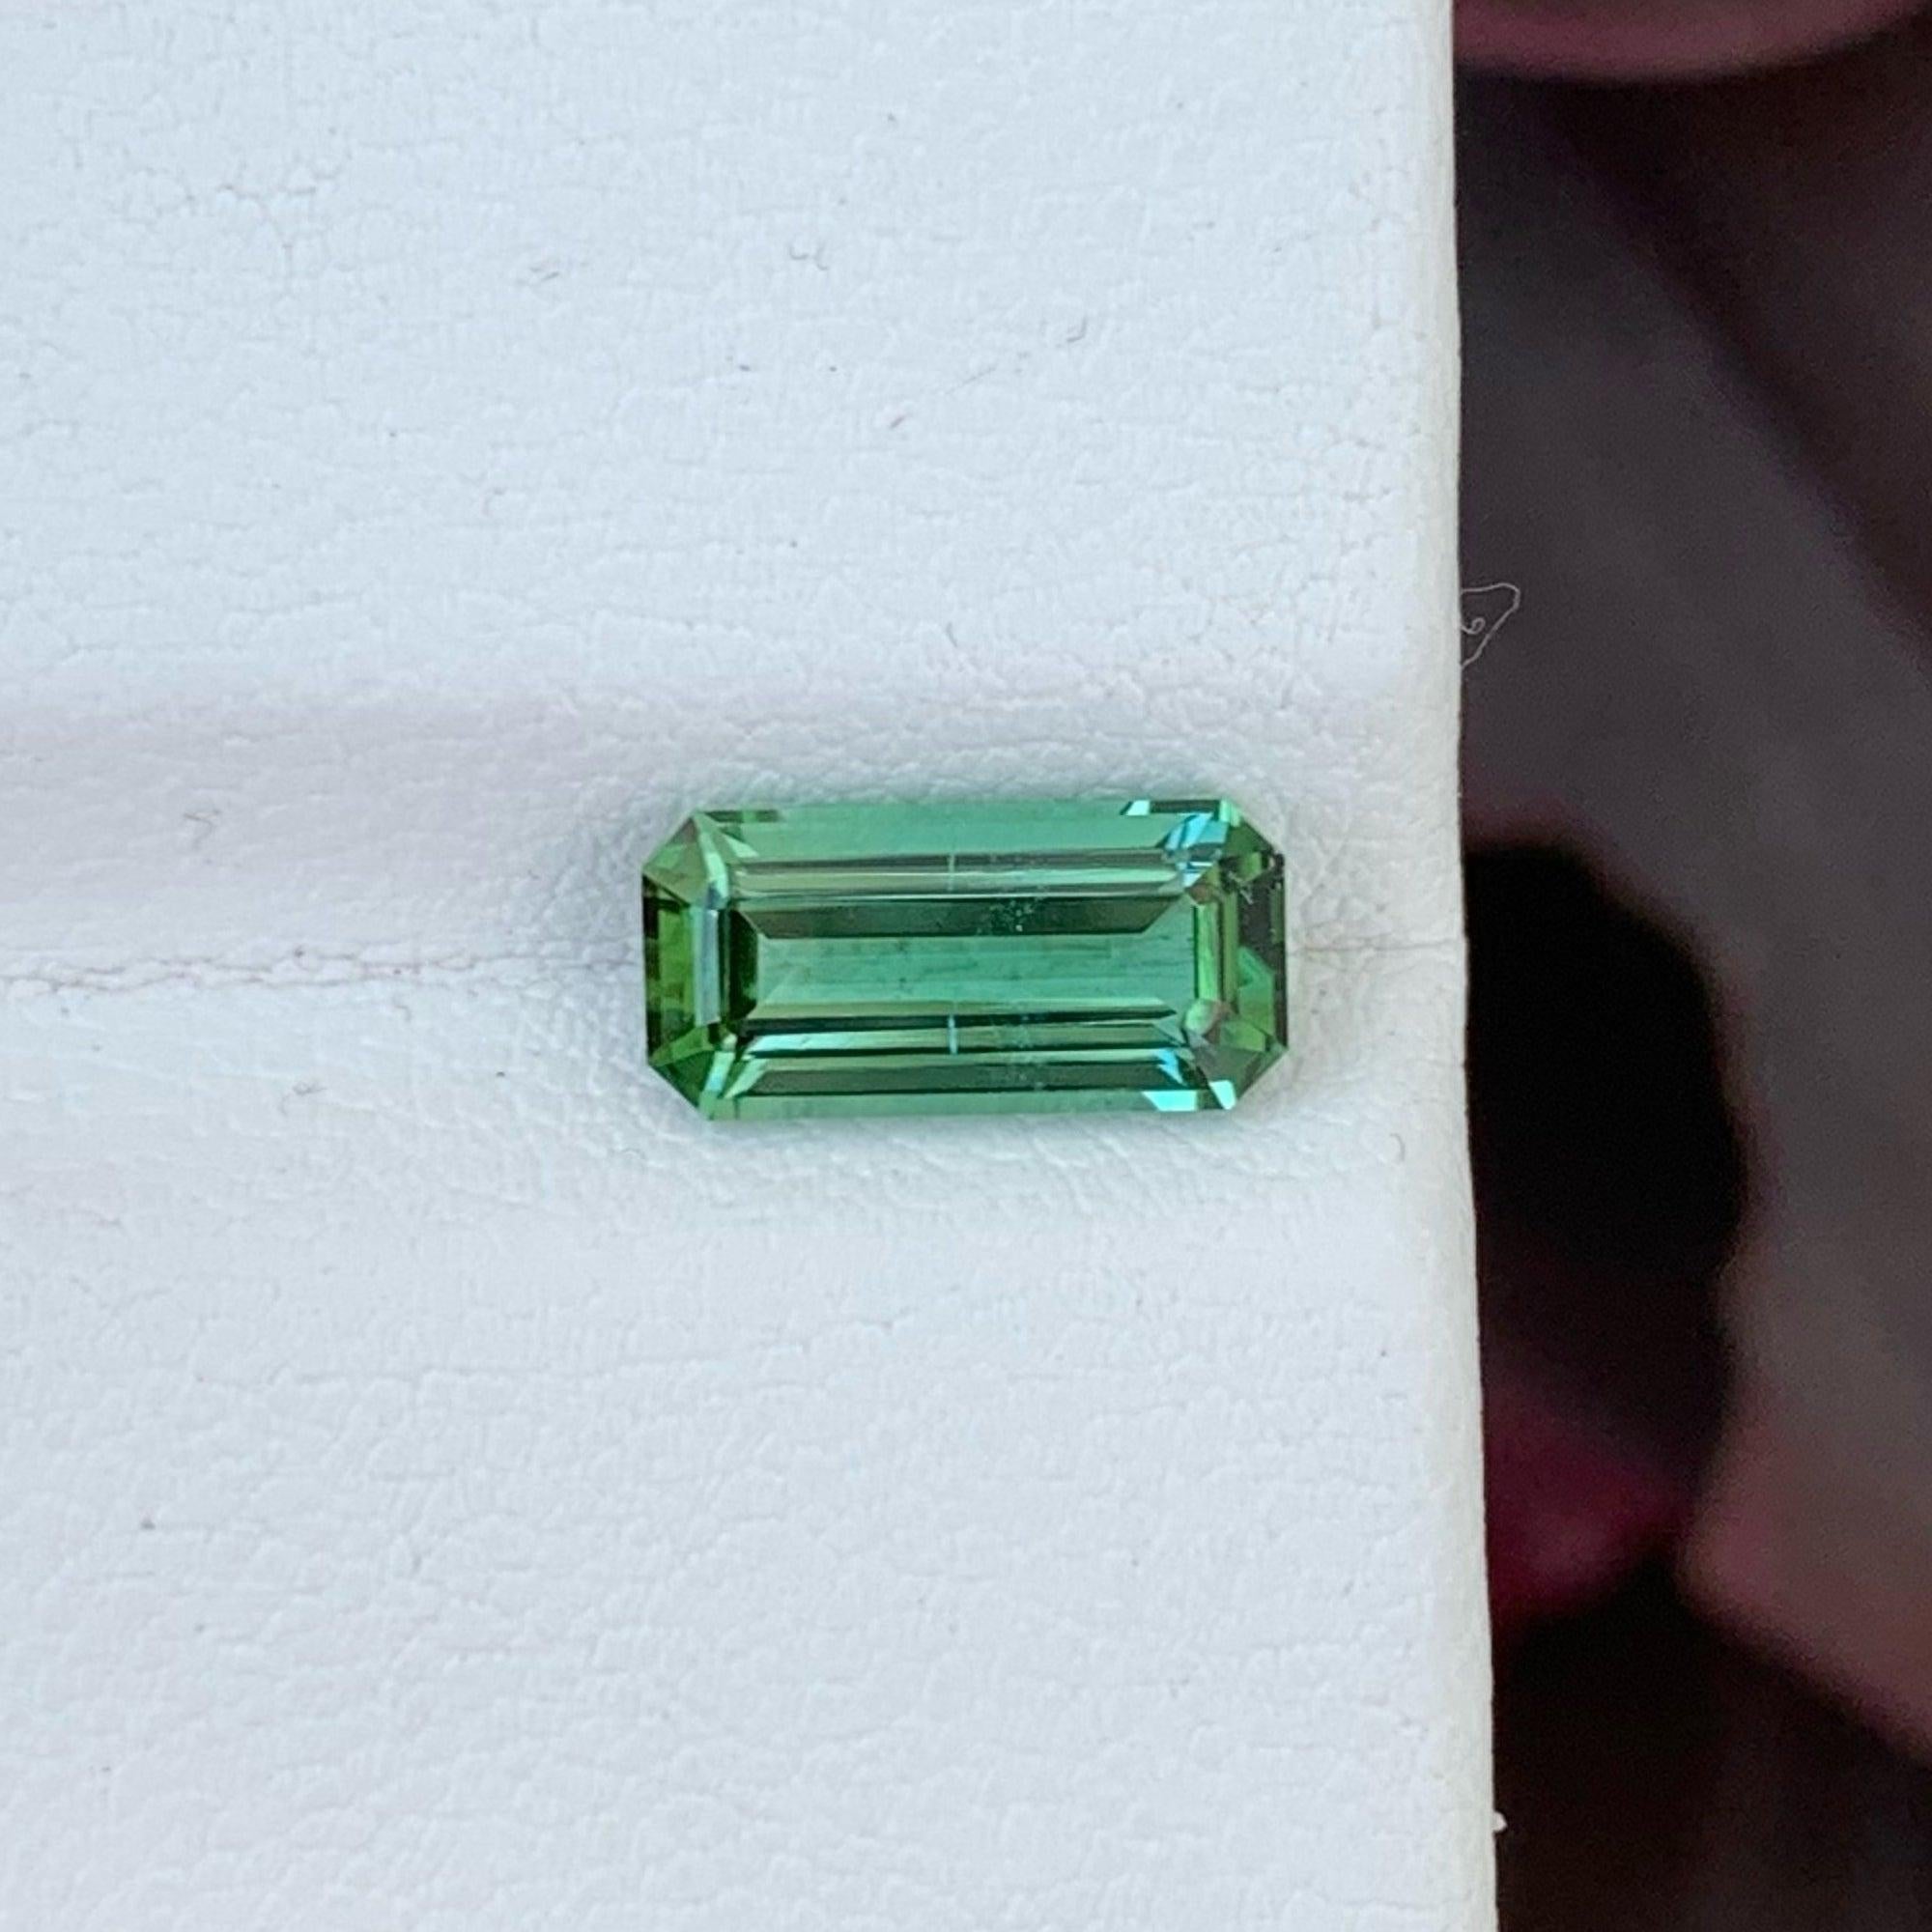 Majestic Natural Tourmaline For Ring, Available For Sale At Wholesale Price Natural High Quality 1.95 Carats Vvs Clarity Untreated Tourmaline From Afghanistan.

Product Information:

GEMSTONE TYPE: Majestic Natural Tourmaline For Ring
WEIGHT: 1.95